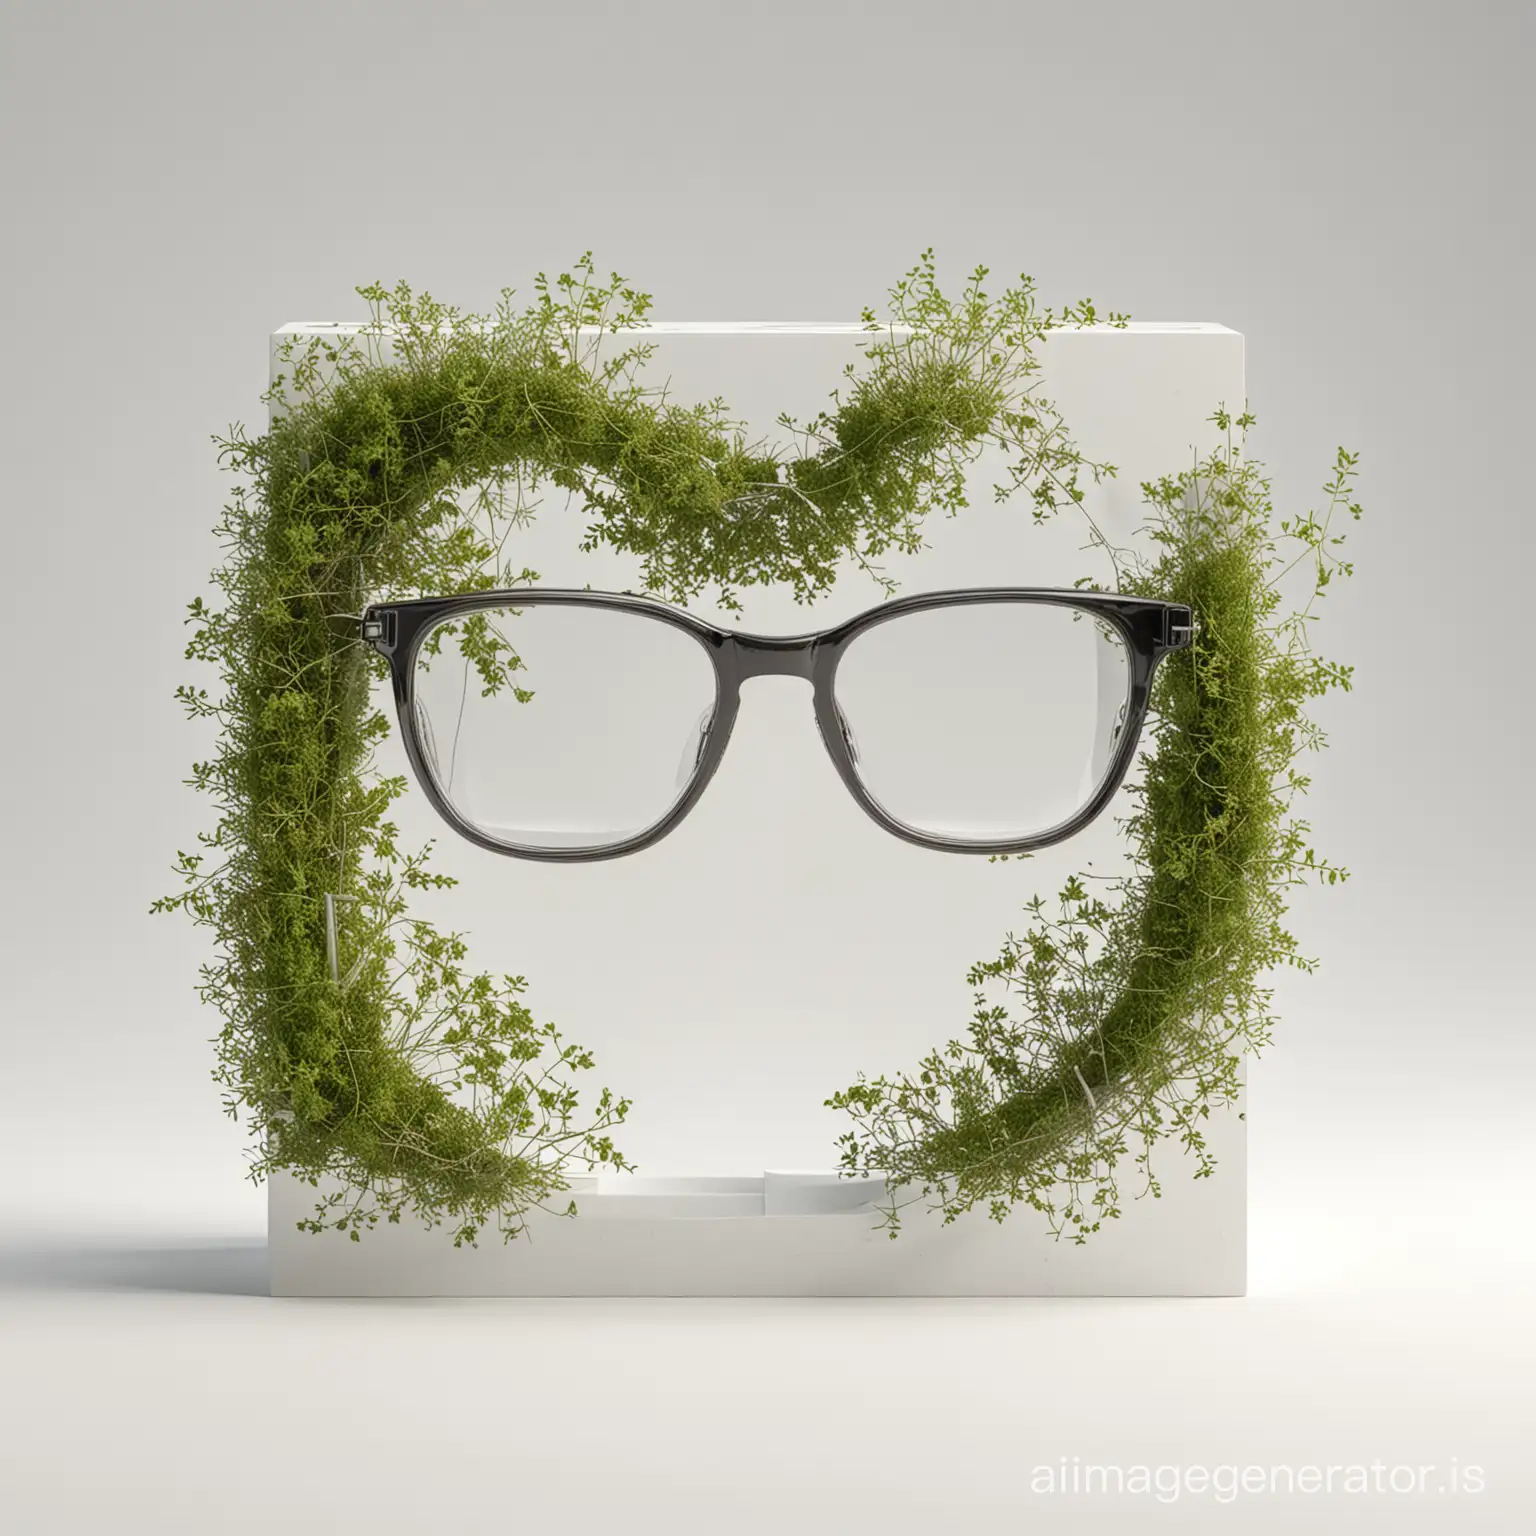 eyeglasses in center, 3D composition of simple shapes like cylinder or cube, minimum moss and birch textures, white background, high resolution